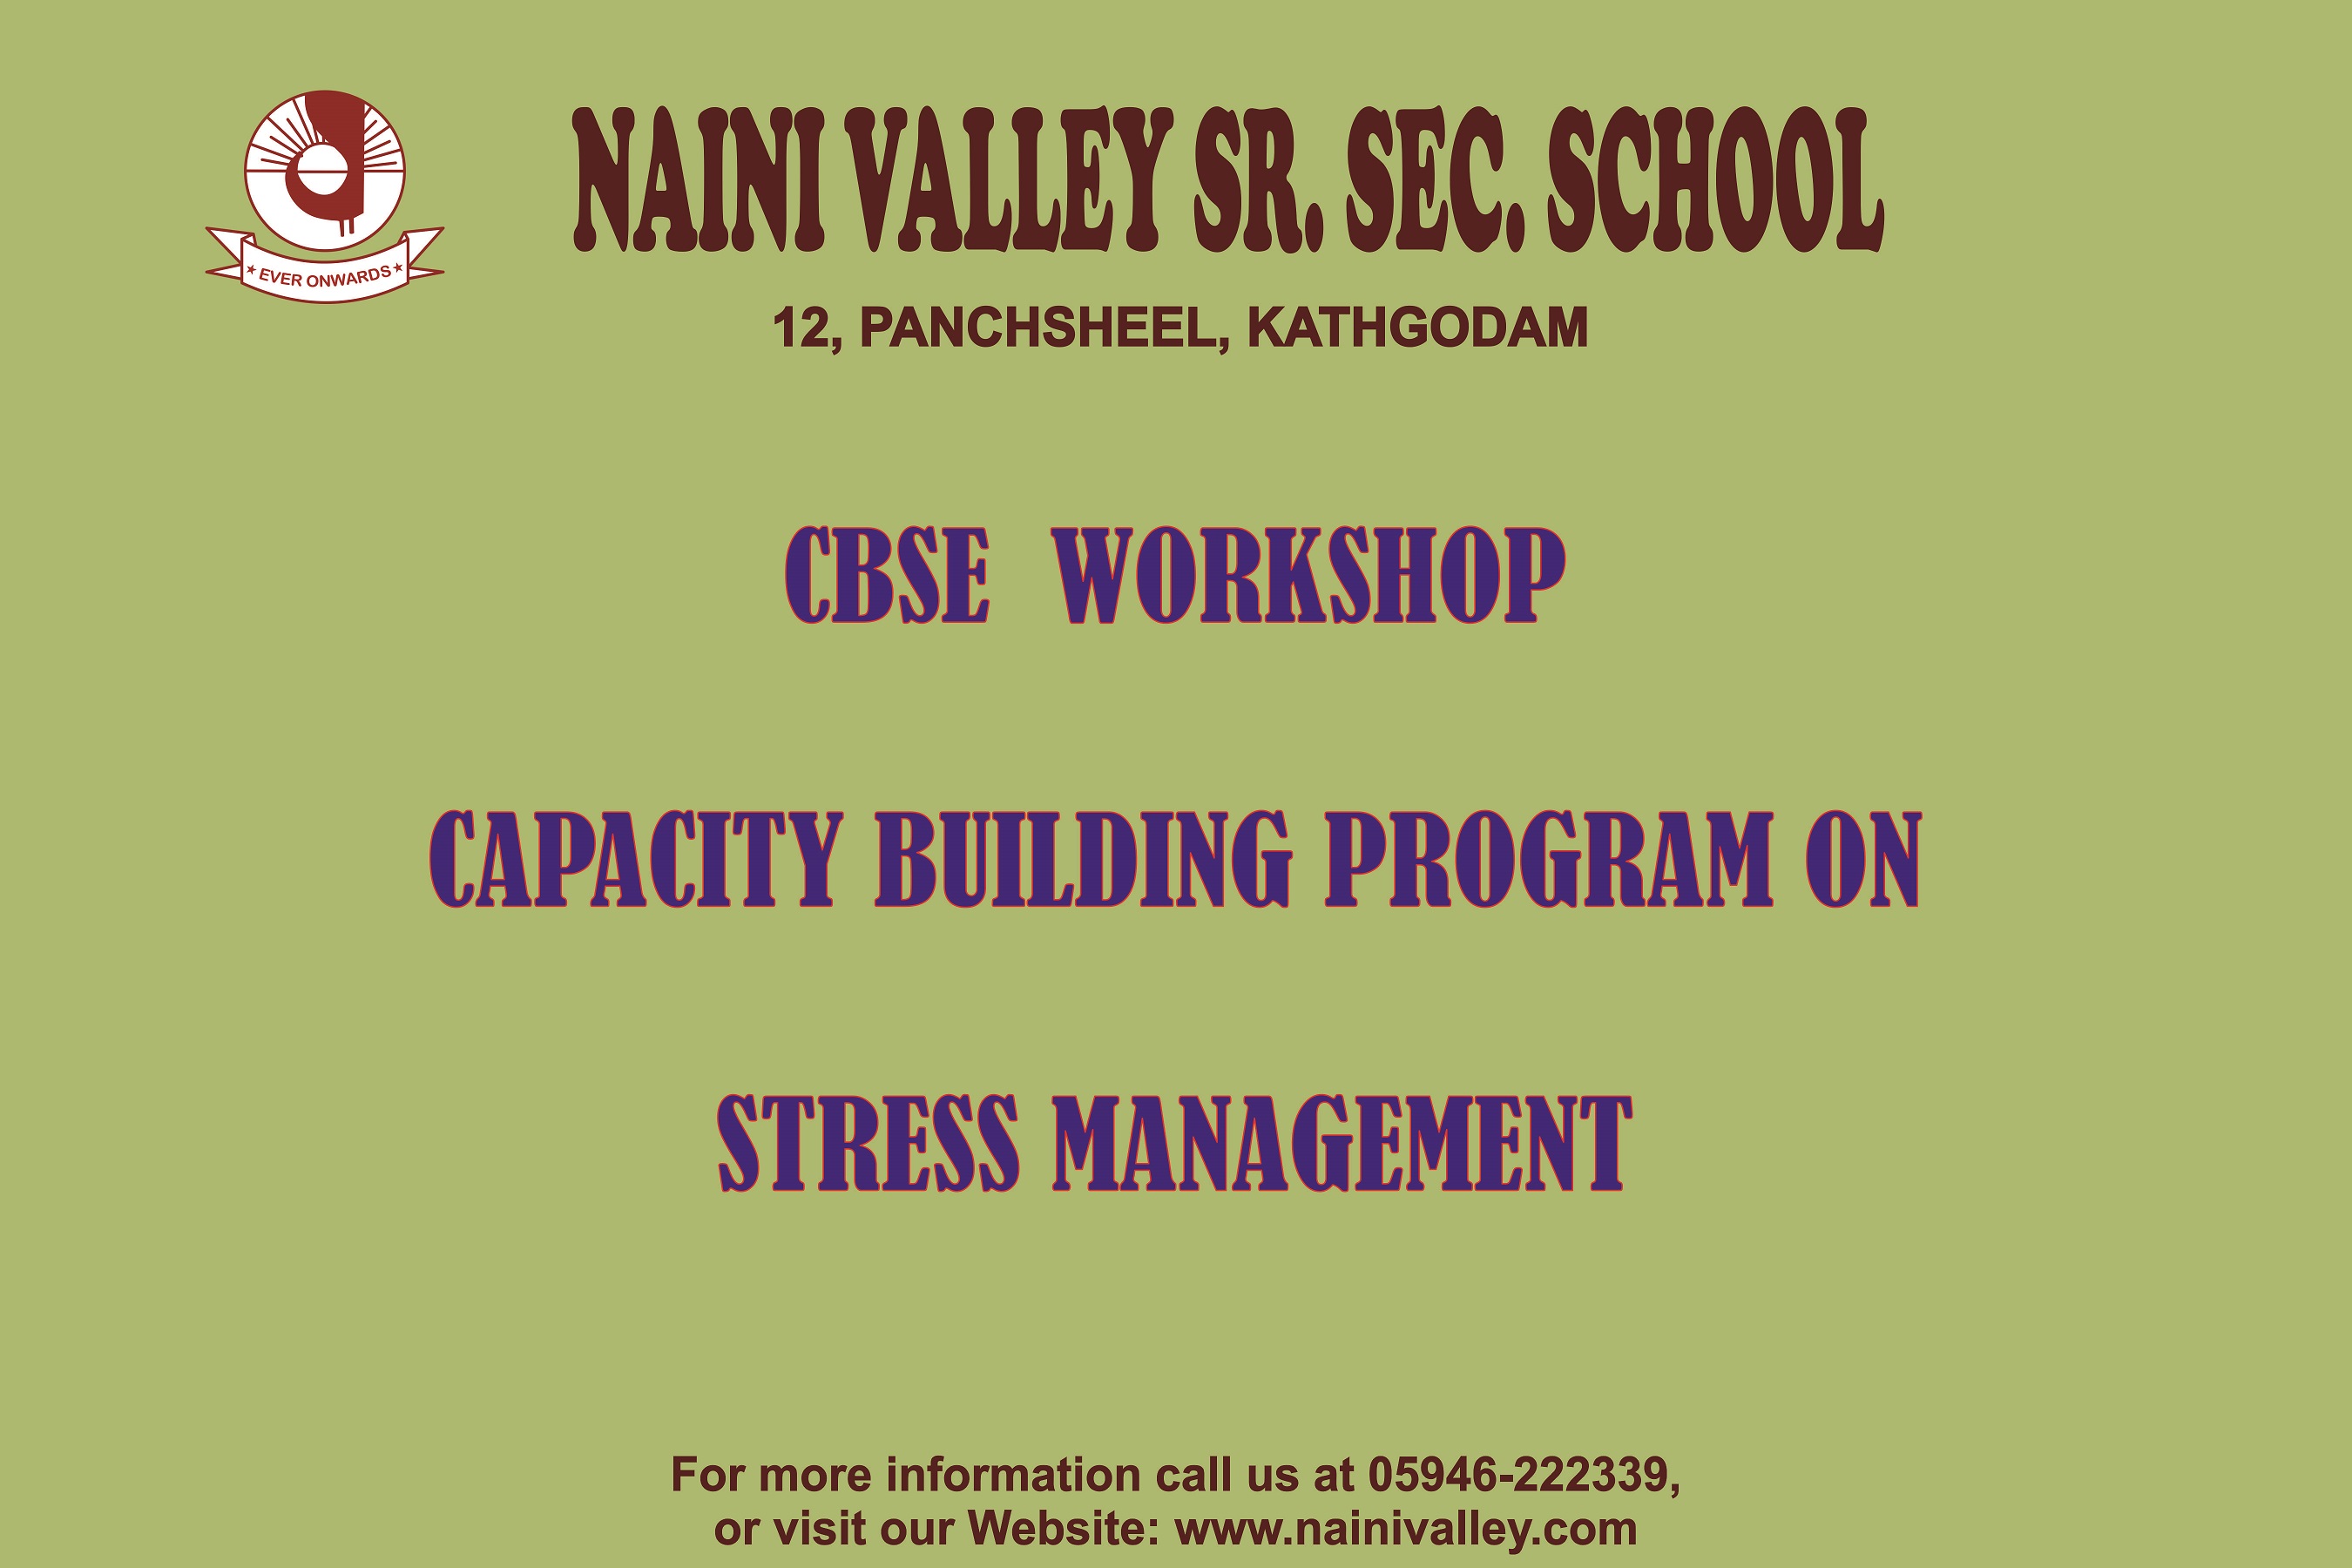 CENTRAL BOARD OF SECONDARY EDUCATION  Capacity Building Program of Stress Management Workshop...